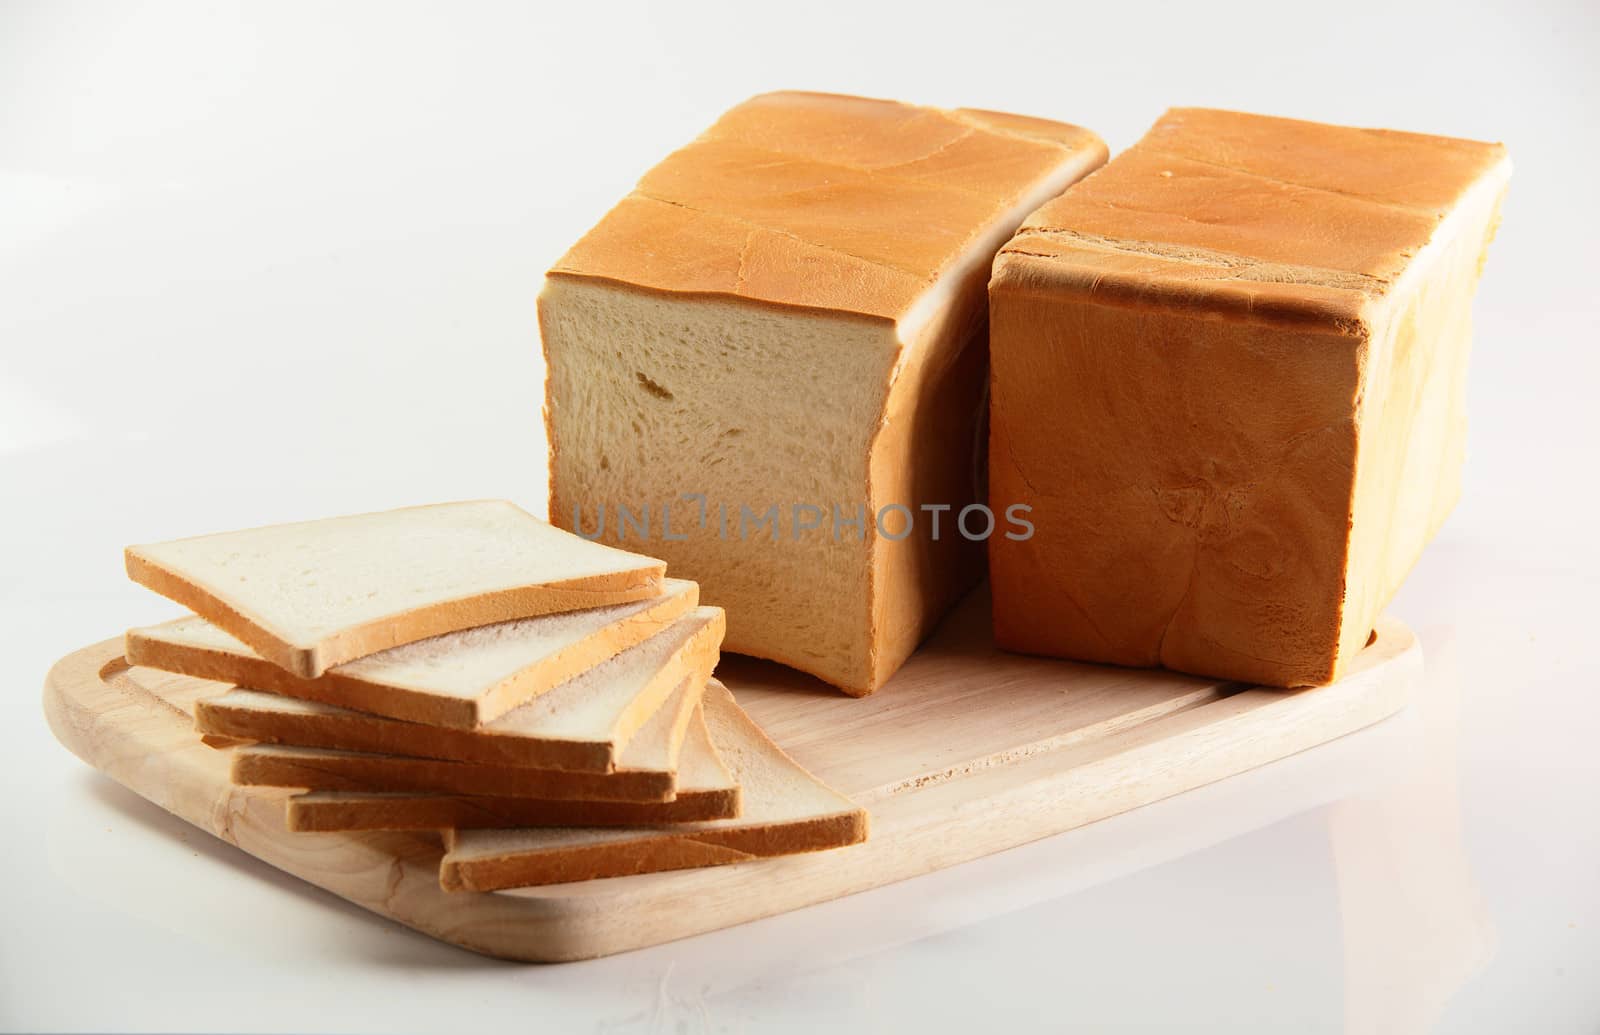 tasty bread on white background by fiphoto